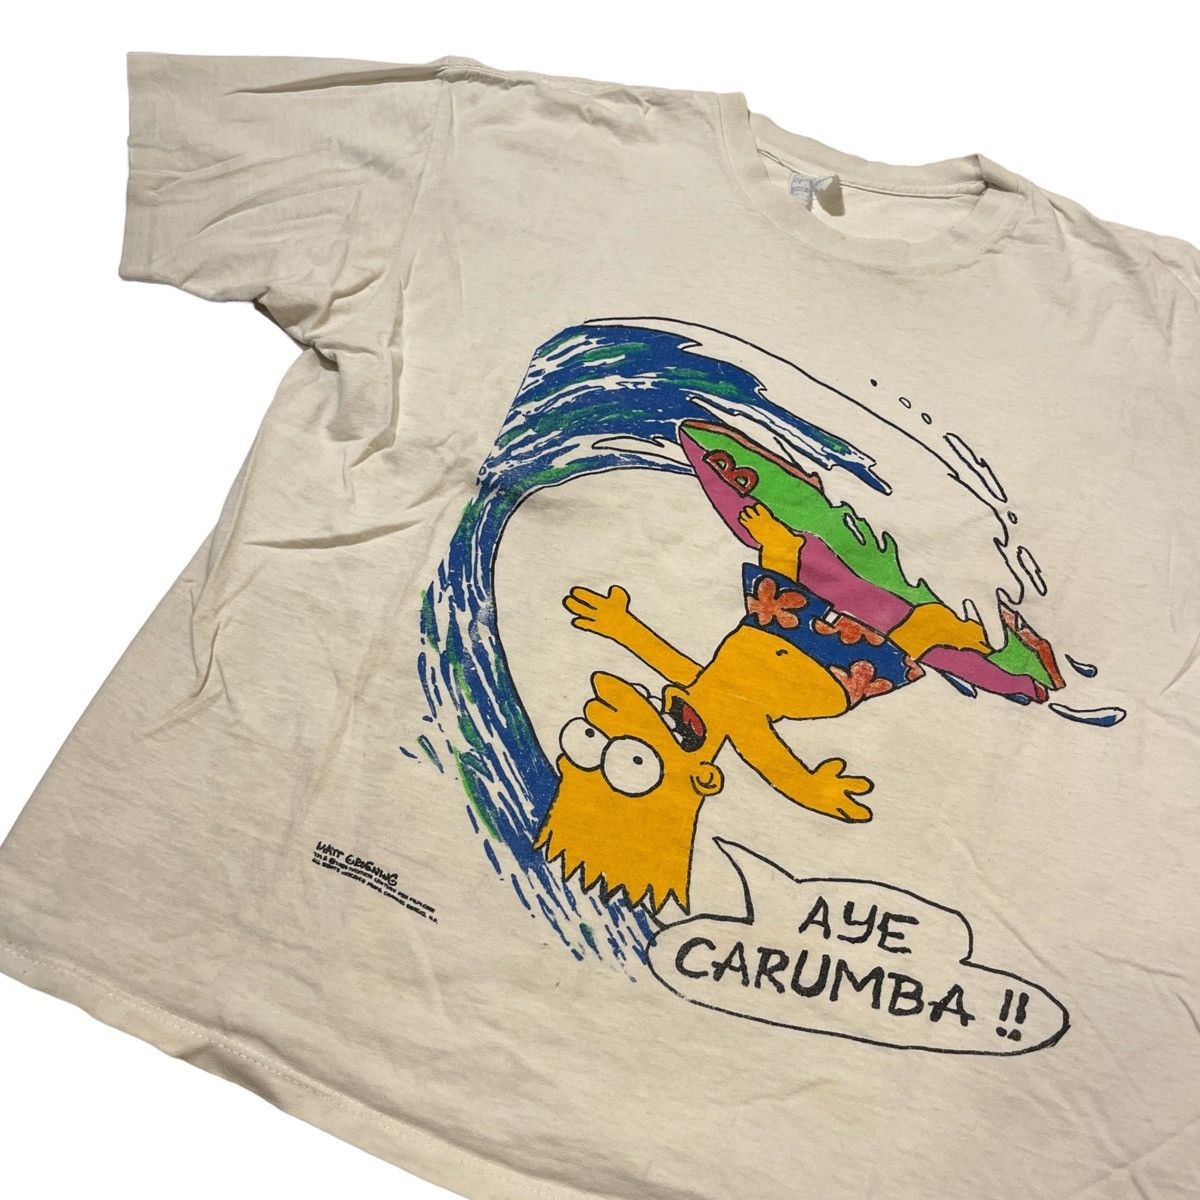 Vintage 90s The Simpsons Bart Surfing Tee Size US L / EU 52-54 / 3 - 2 Preview